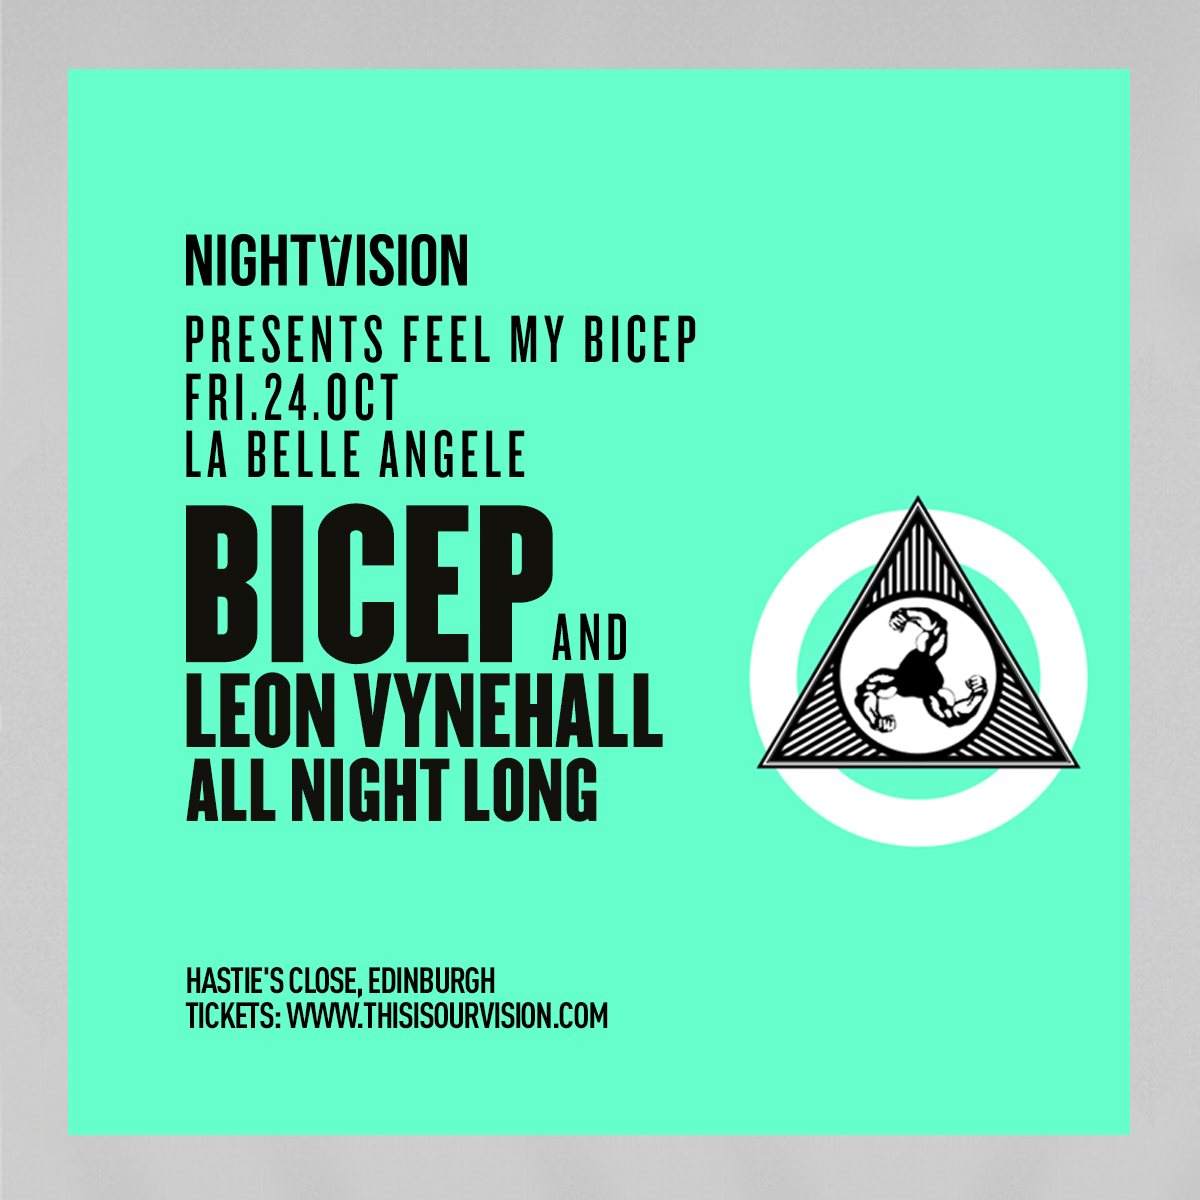 Nightvision presents Feel My Bicep - Bicep x Leon Vynehall All Night Long - フライヤー表